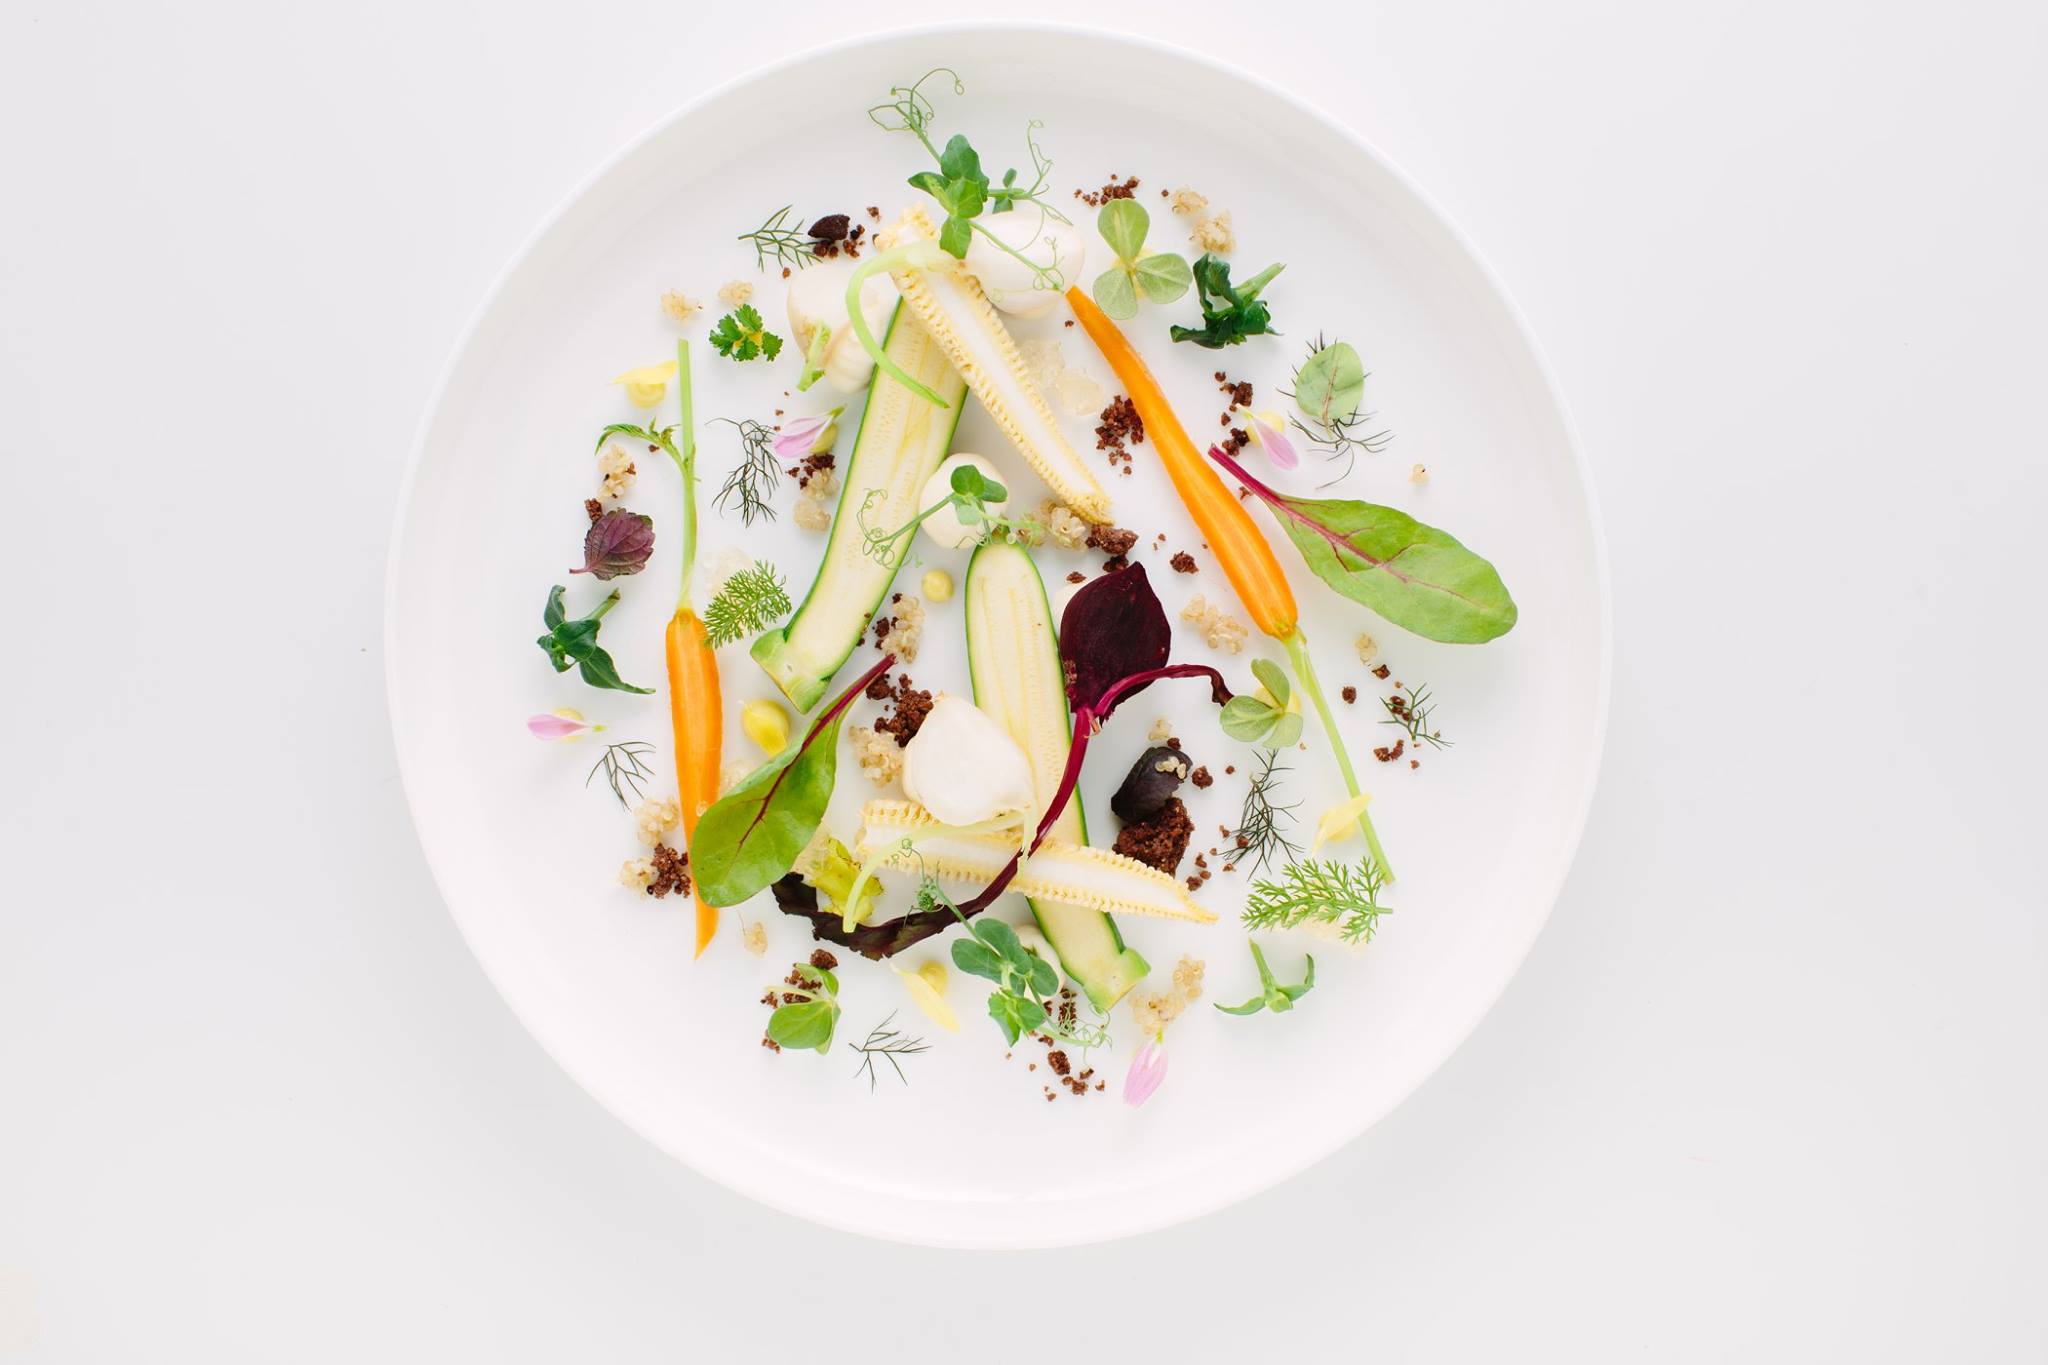 Spring garden: vegetables, cream, quinoa, sprouts, aromas and herbs with mayonnaise.